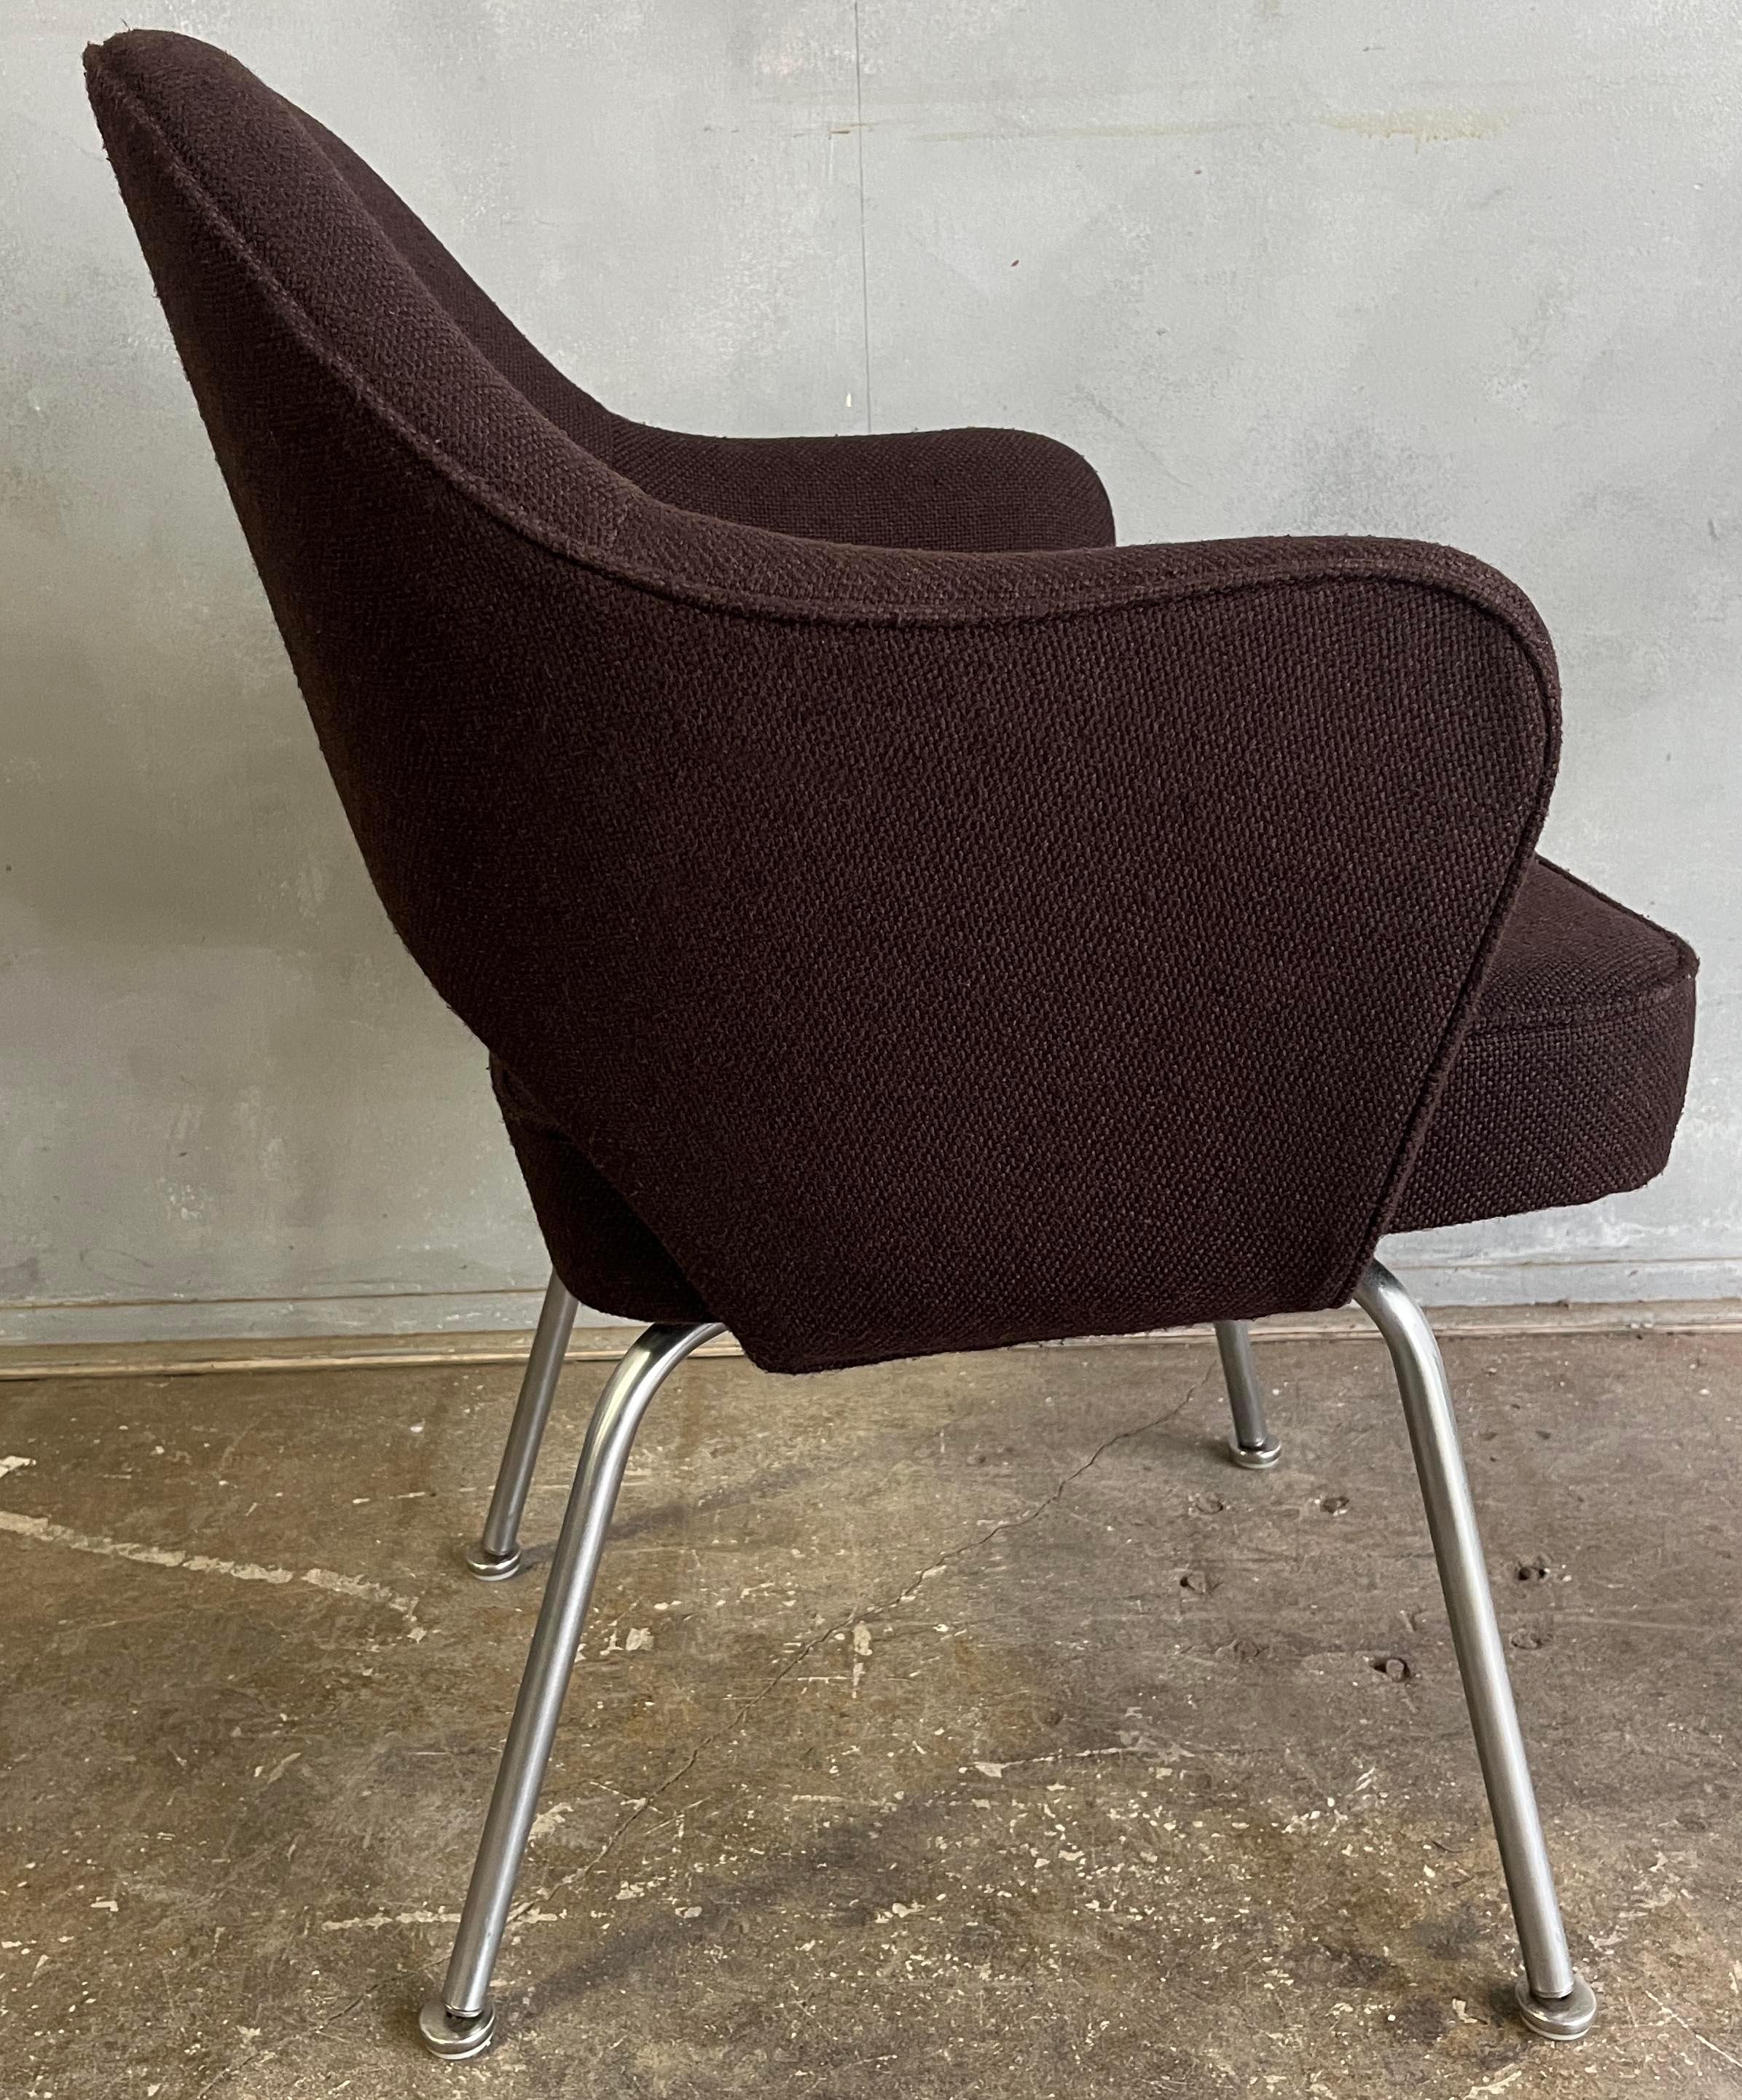 American Pair of Brown Saarinen Executive / Dining Chairs or Knoll  For Sale